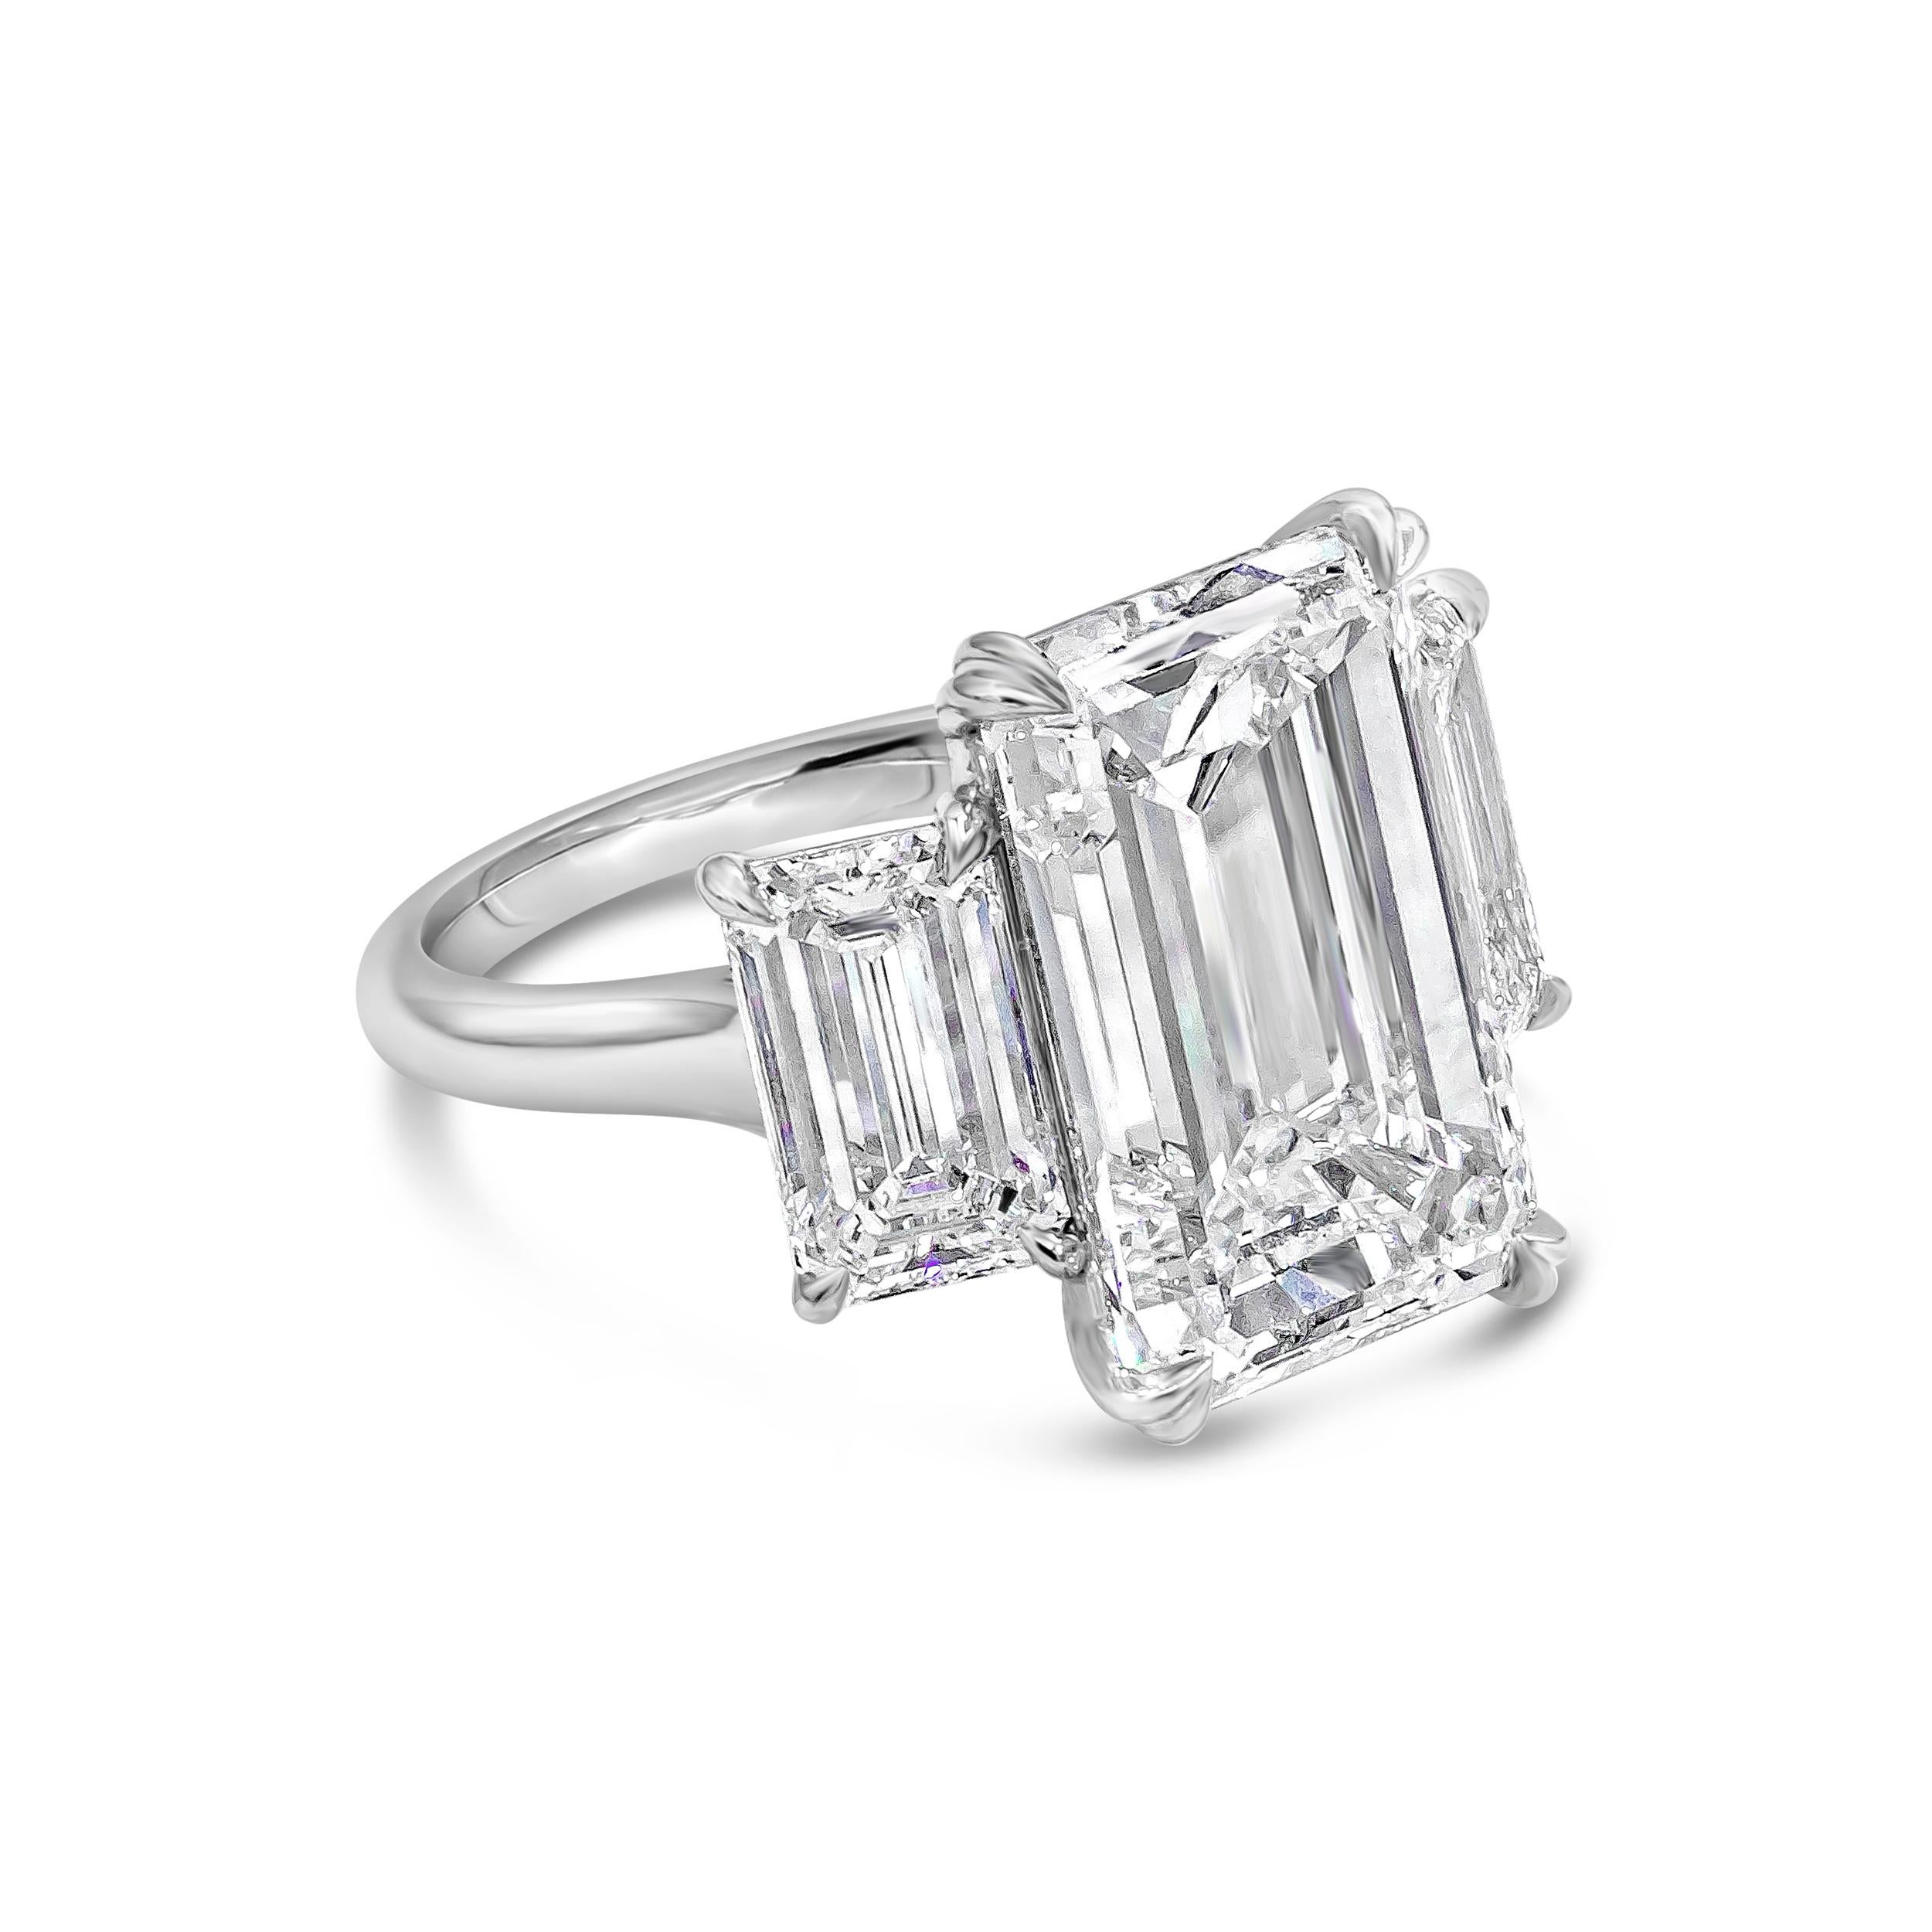 A classy high end jewelry engagement ring showcasing a center stone weighing 9.82 carats emerald cut diamond certified by GIA as G color and VVS1 in clarity. Flanking the center diamond are two emerald cut diamonds as GIA certified E-F Color and